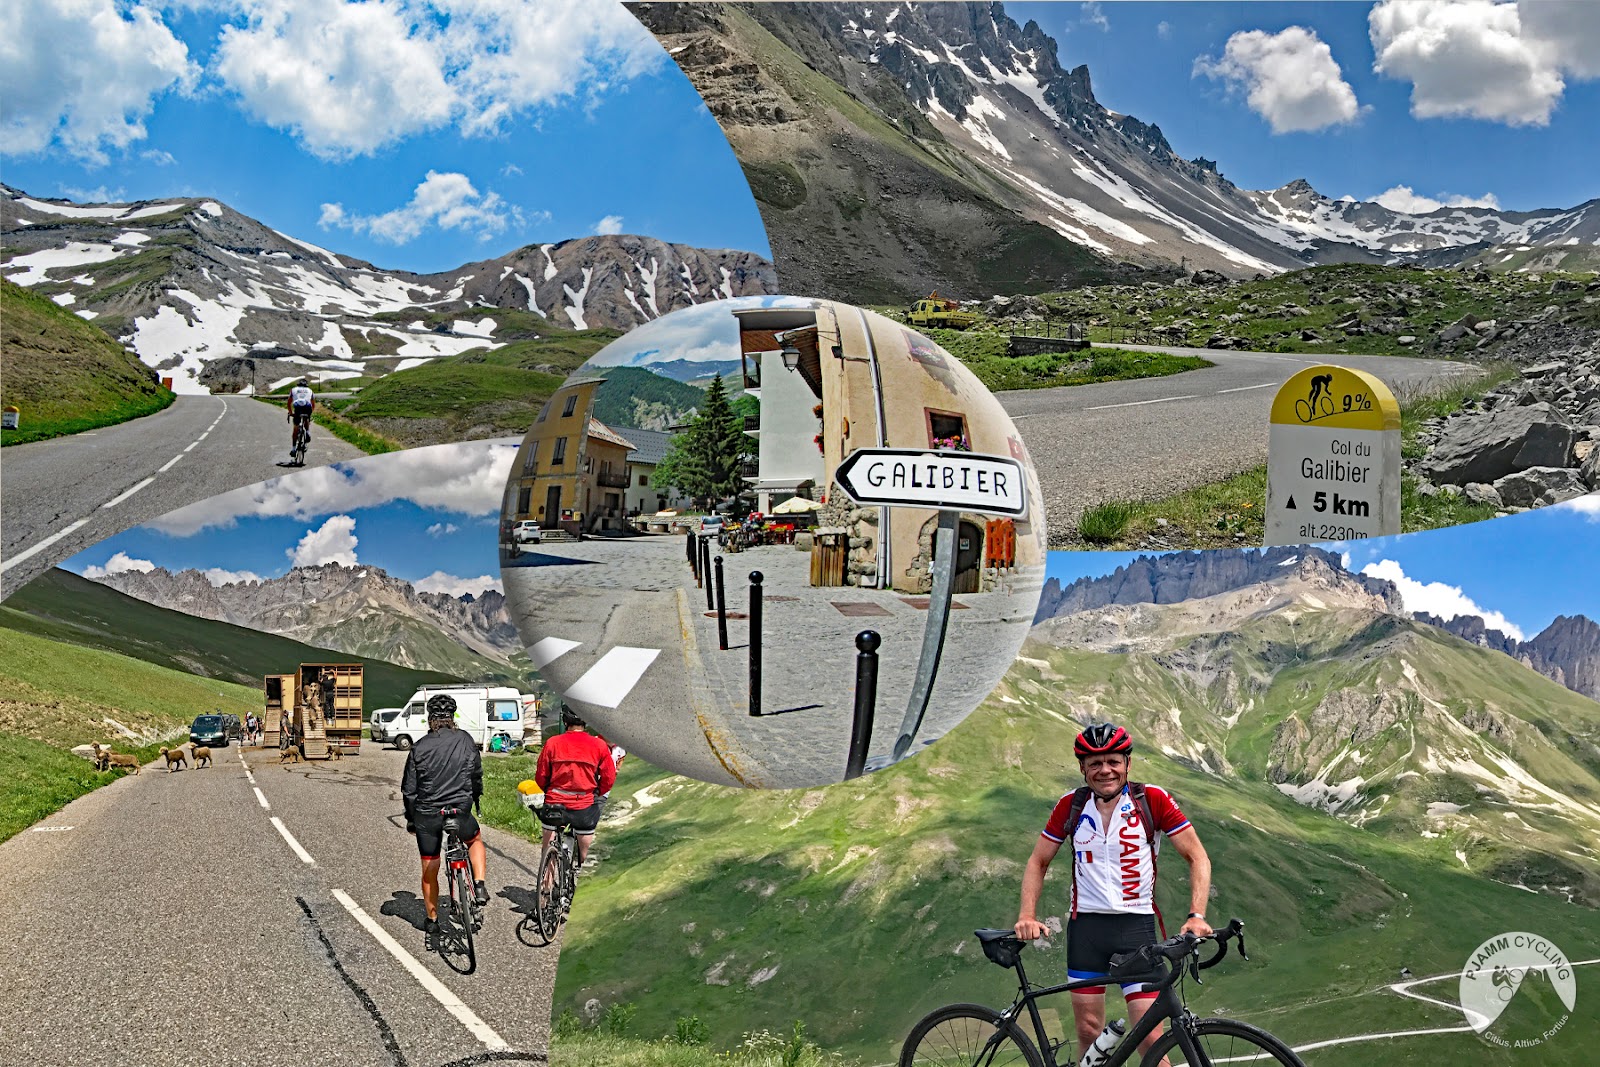 Cycling Col du Galibier from Valloire: photo collage, cyclists climb on two-lane roadway toward snow dotted mountain tops, PJAMM Cyclist stands with bike in front of green mountain views, road sign for Galibier